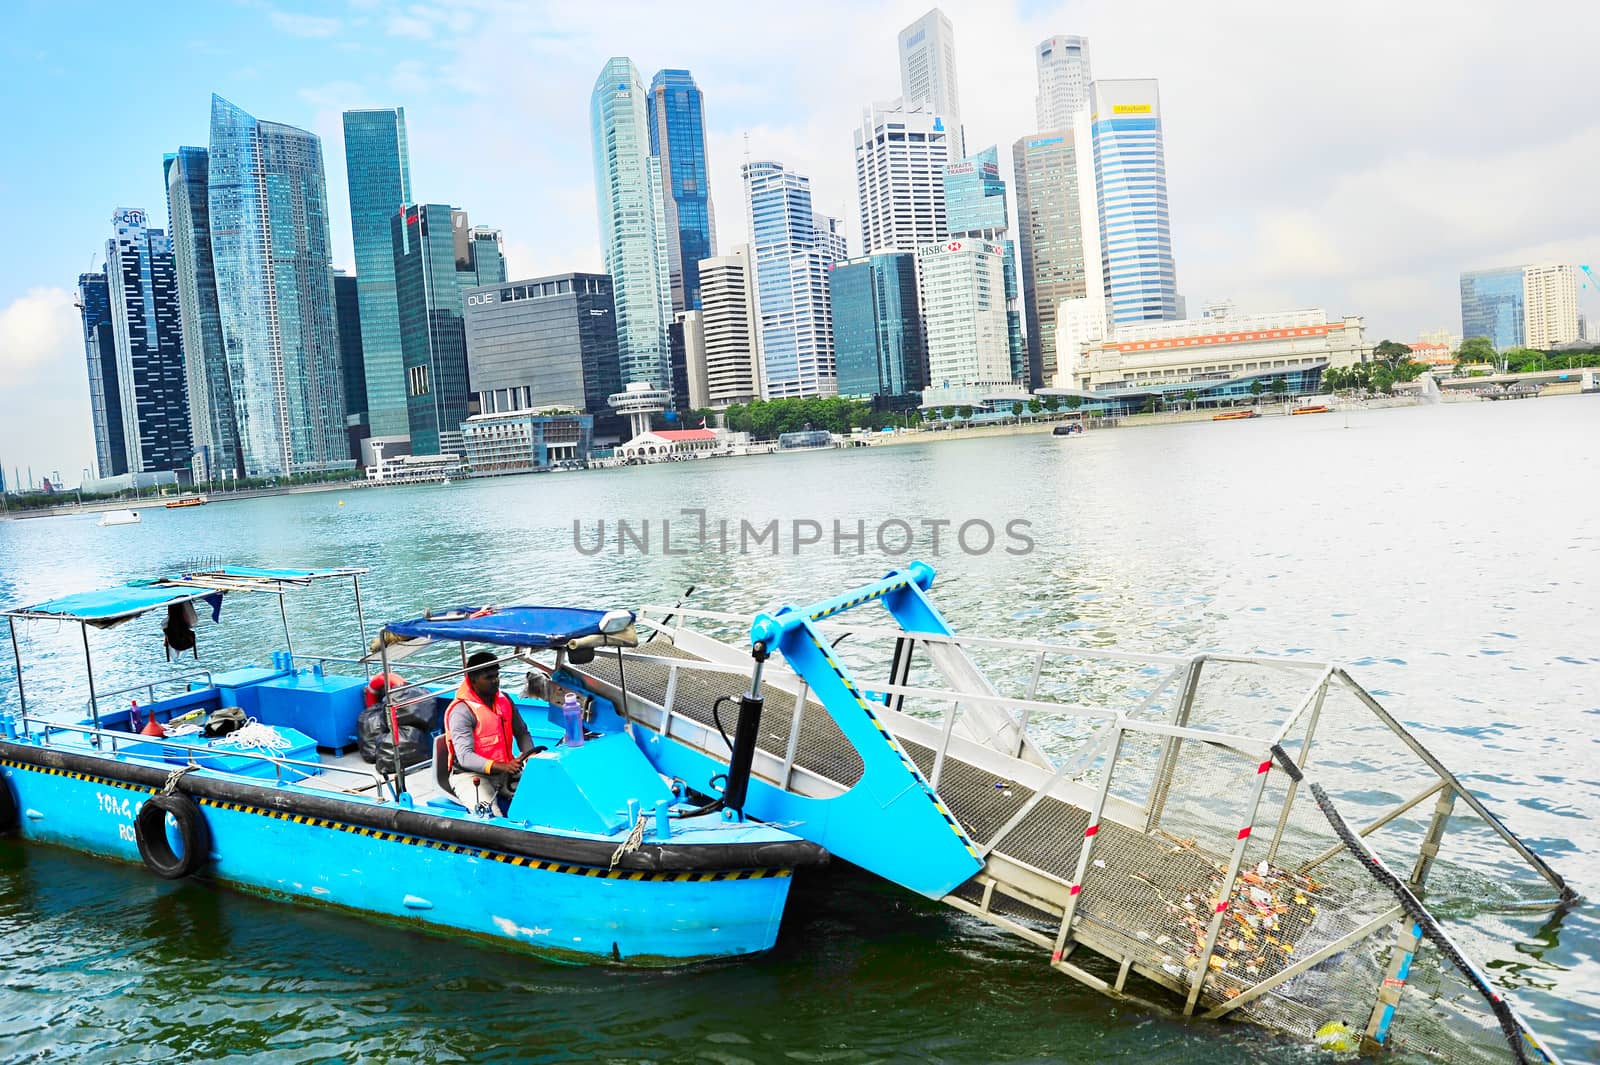 Singapore, Republic of Singapore - March 8, 2013: Water surface cleaning boat removing the garbage from the river in front of Singapore downtown